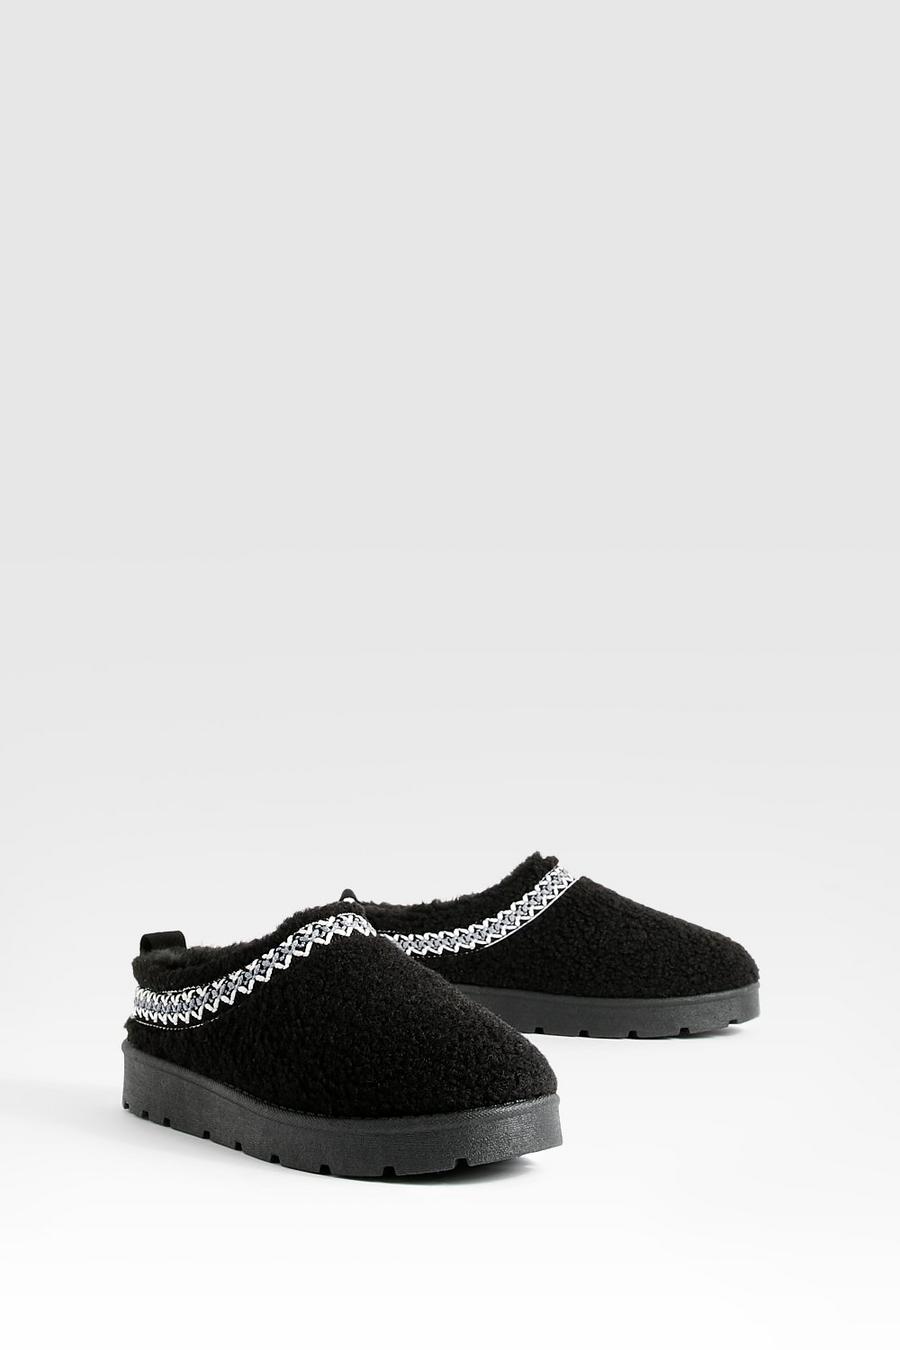 Black Embroidered Detailing Borg Slip On Cozy Mules